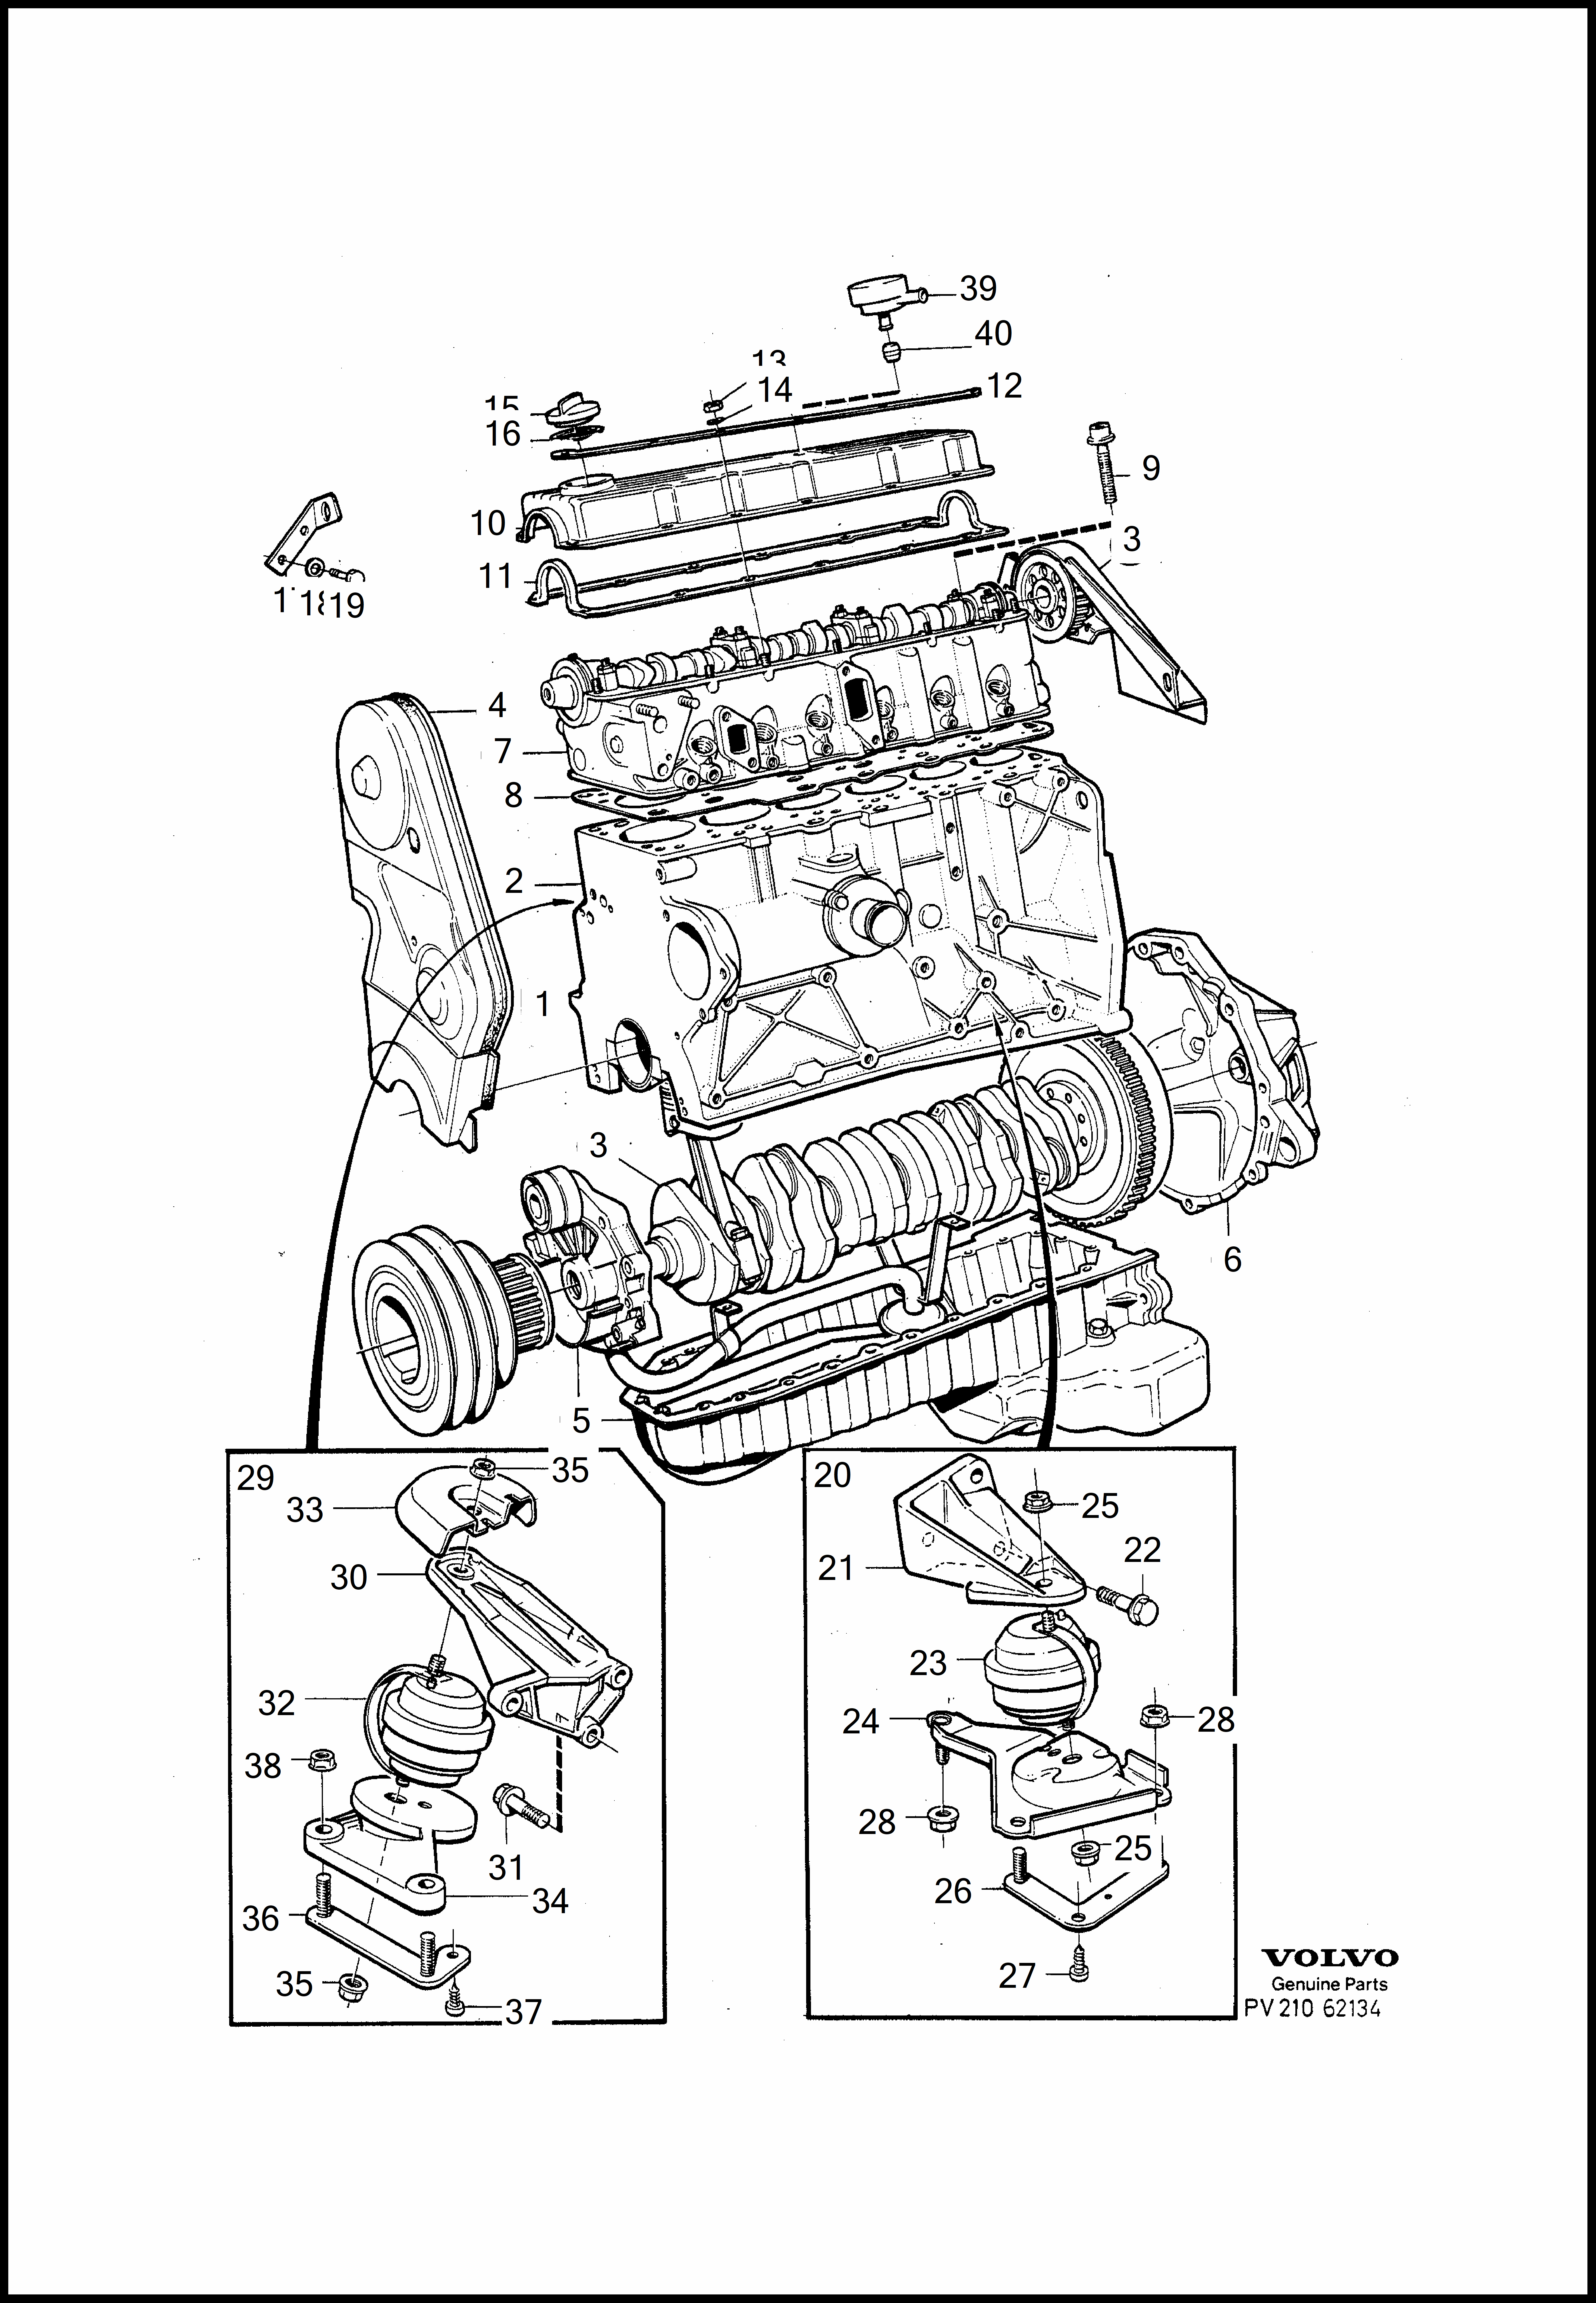 engine with fittings pro Volvo 960 960